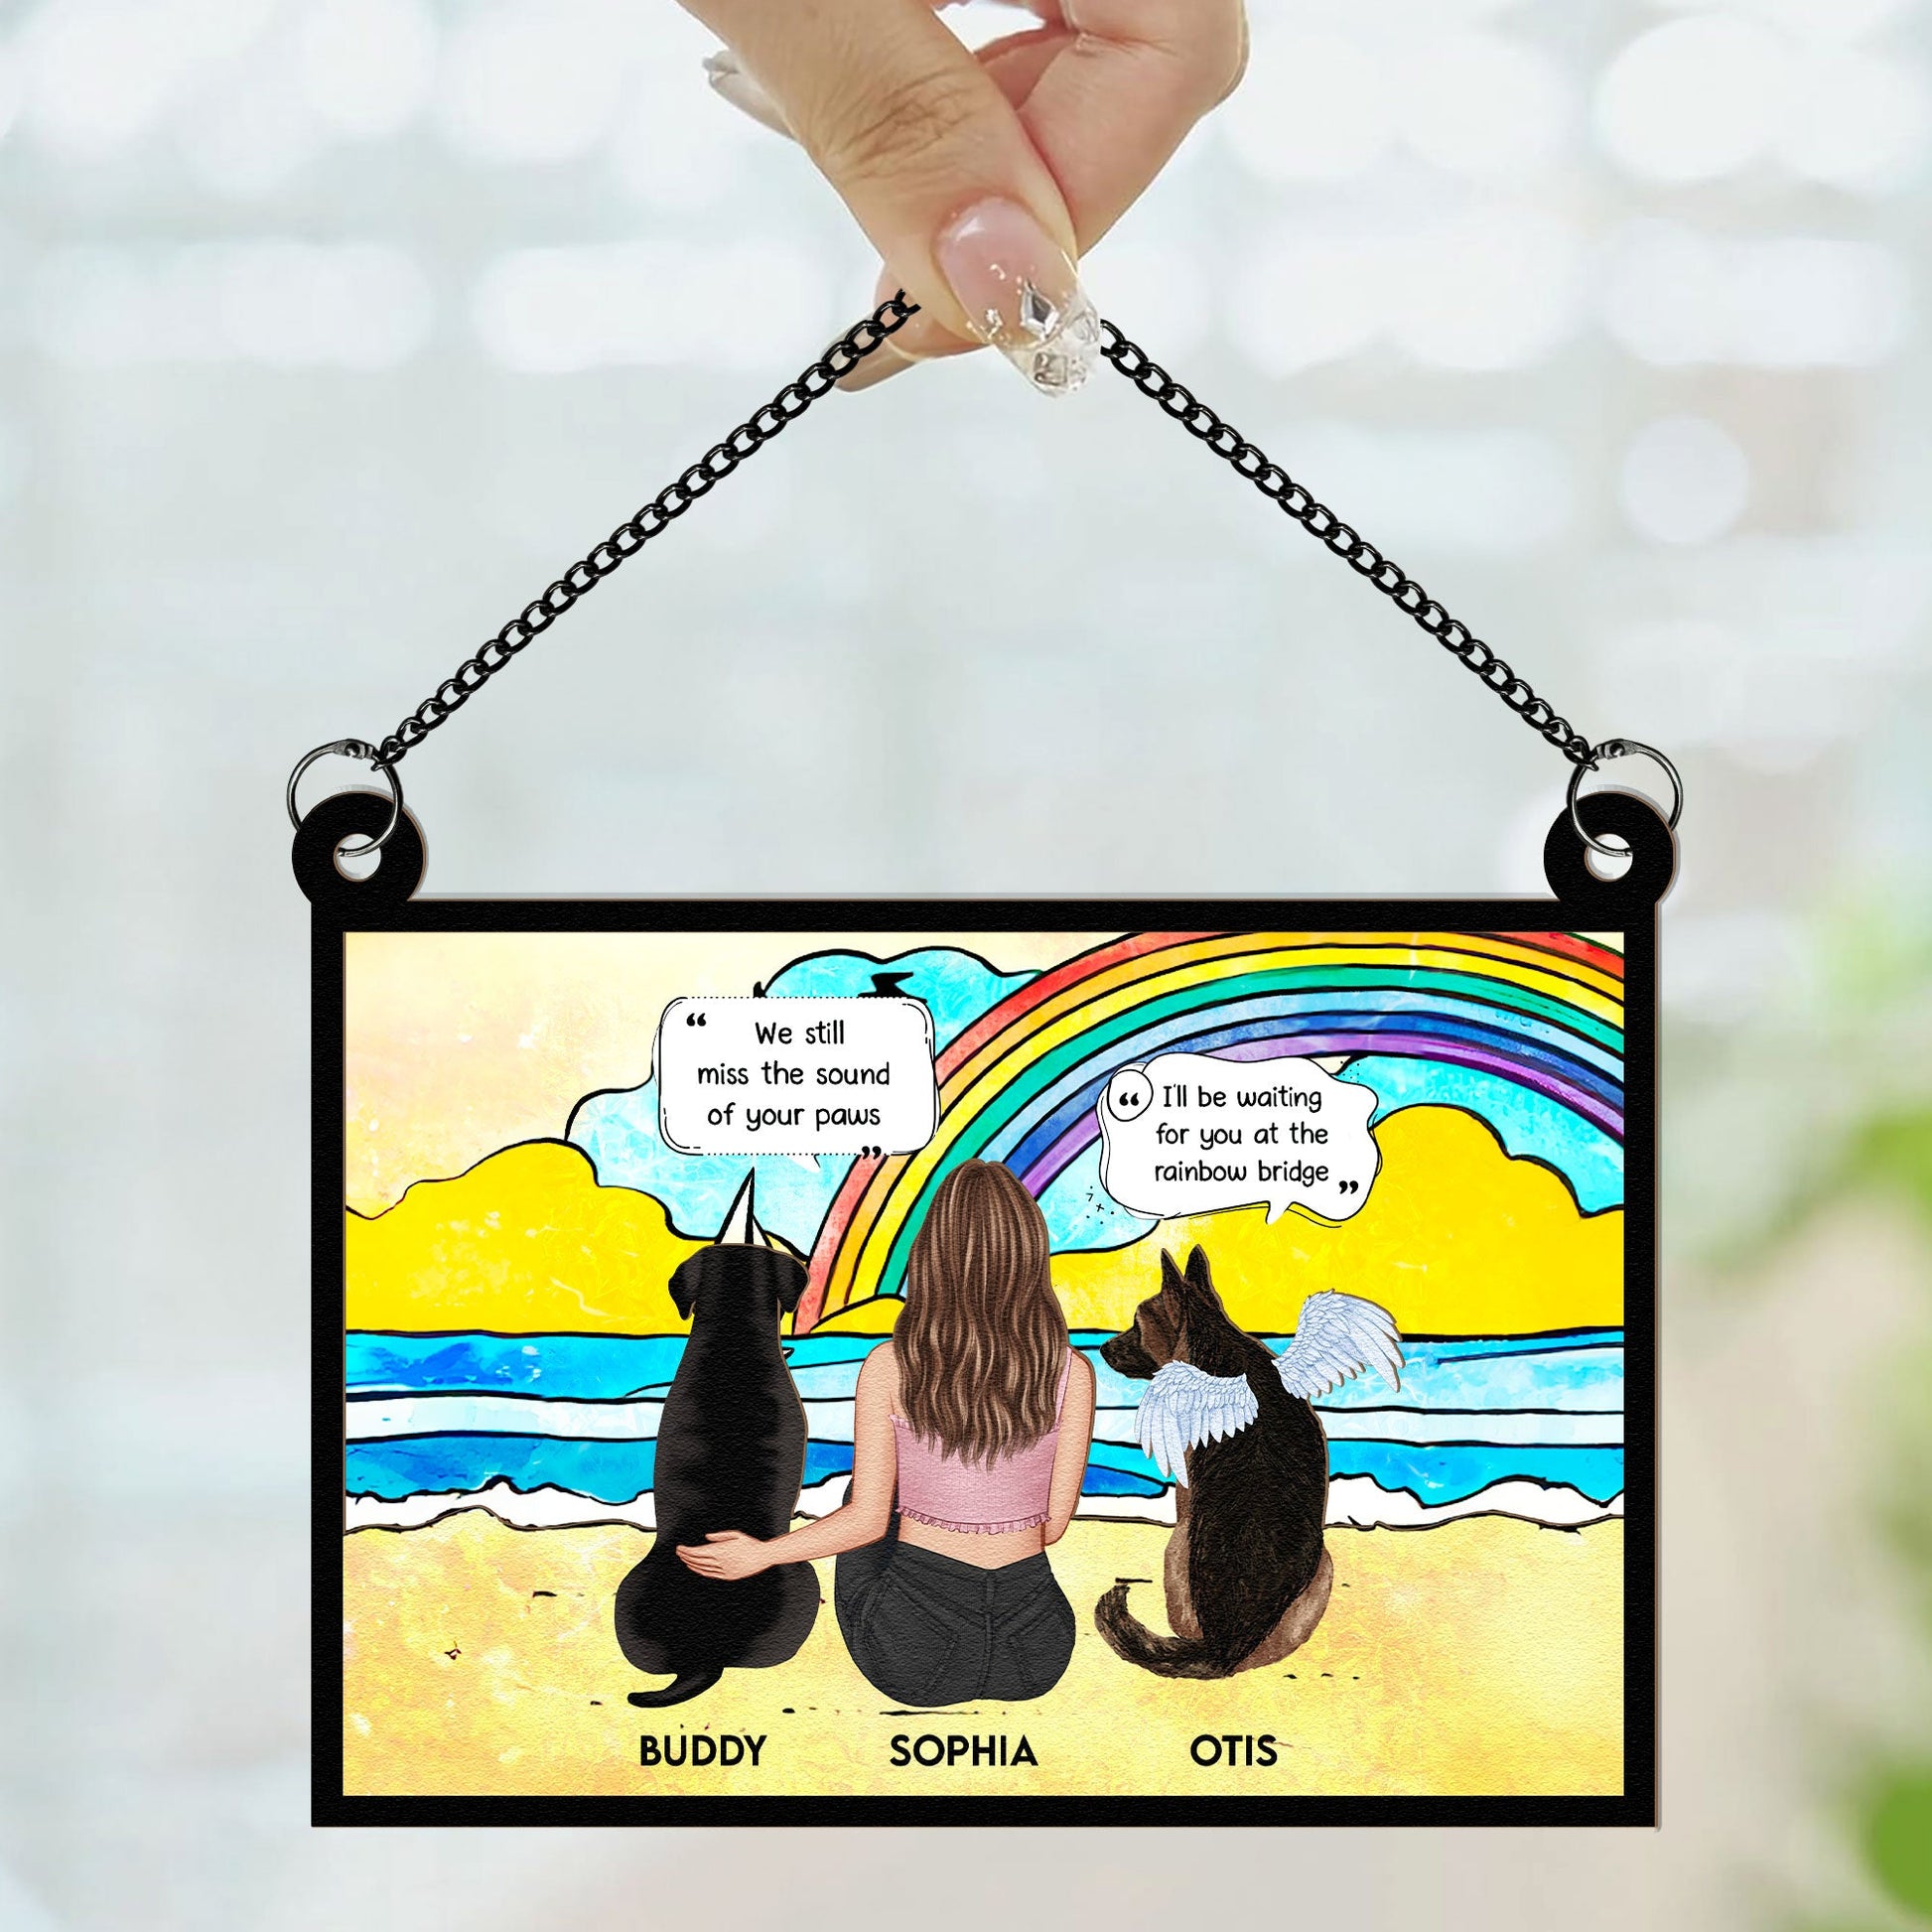 I'll Be Waiting For You - Personalized Window Hanging Suncatcher Ornament